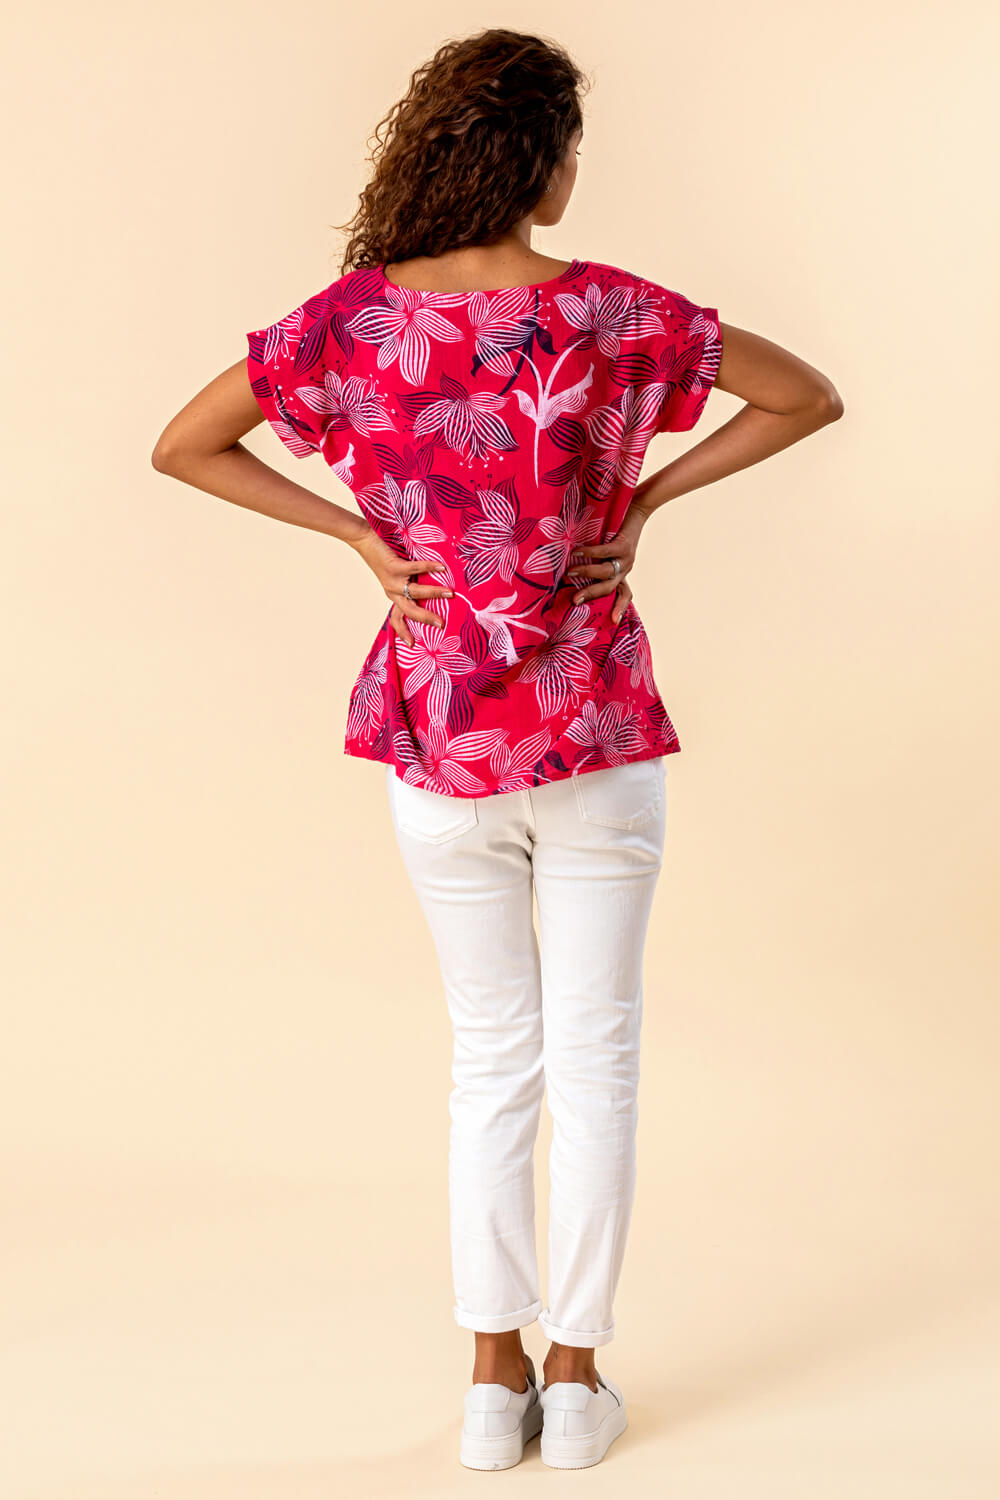 Red Floral Print Cap Sleeve Top, Image 2 of 4